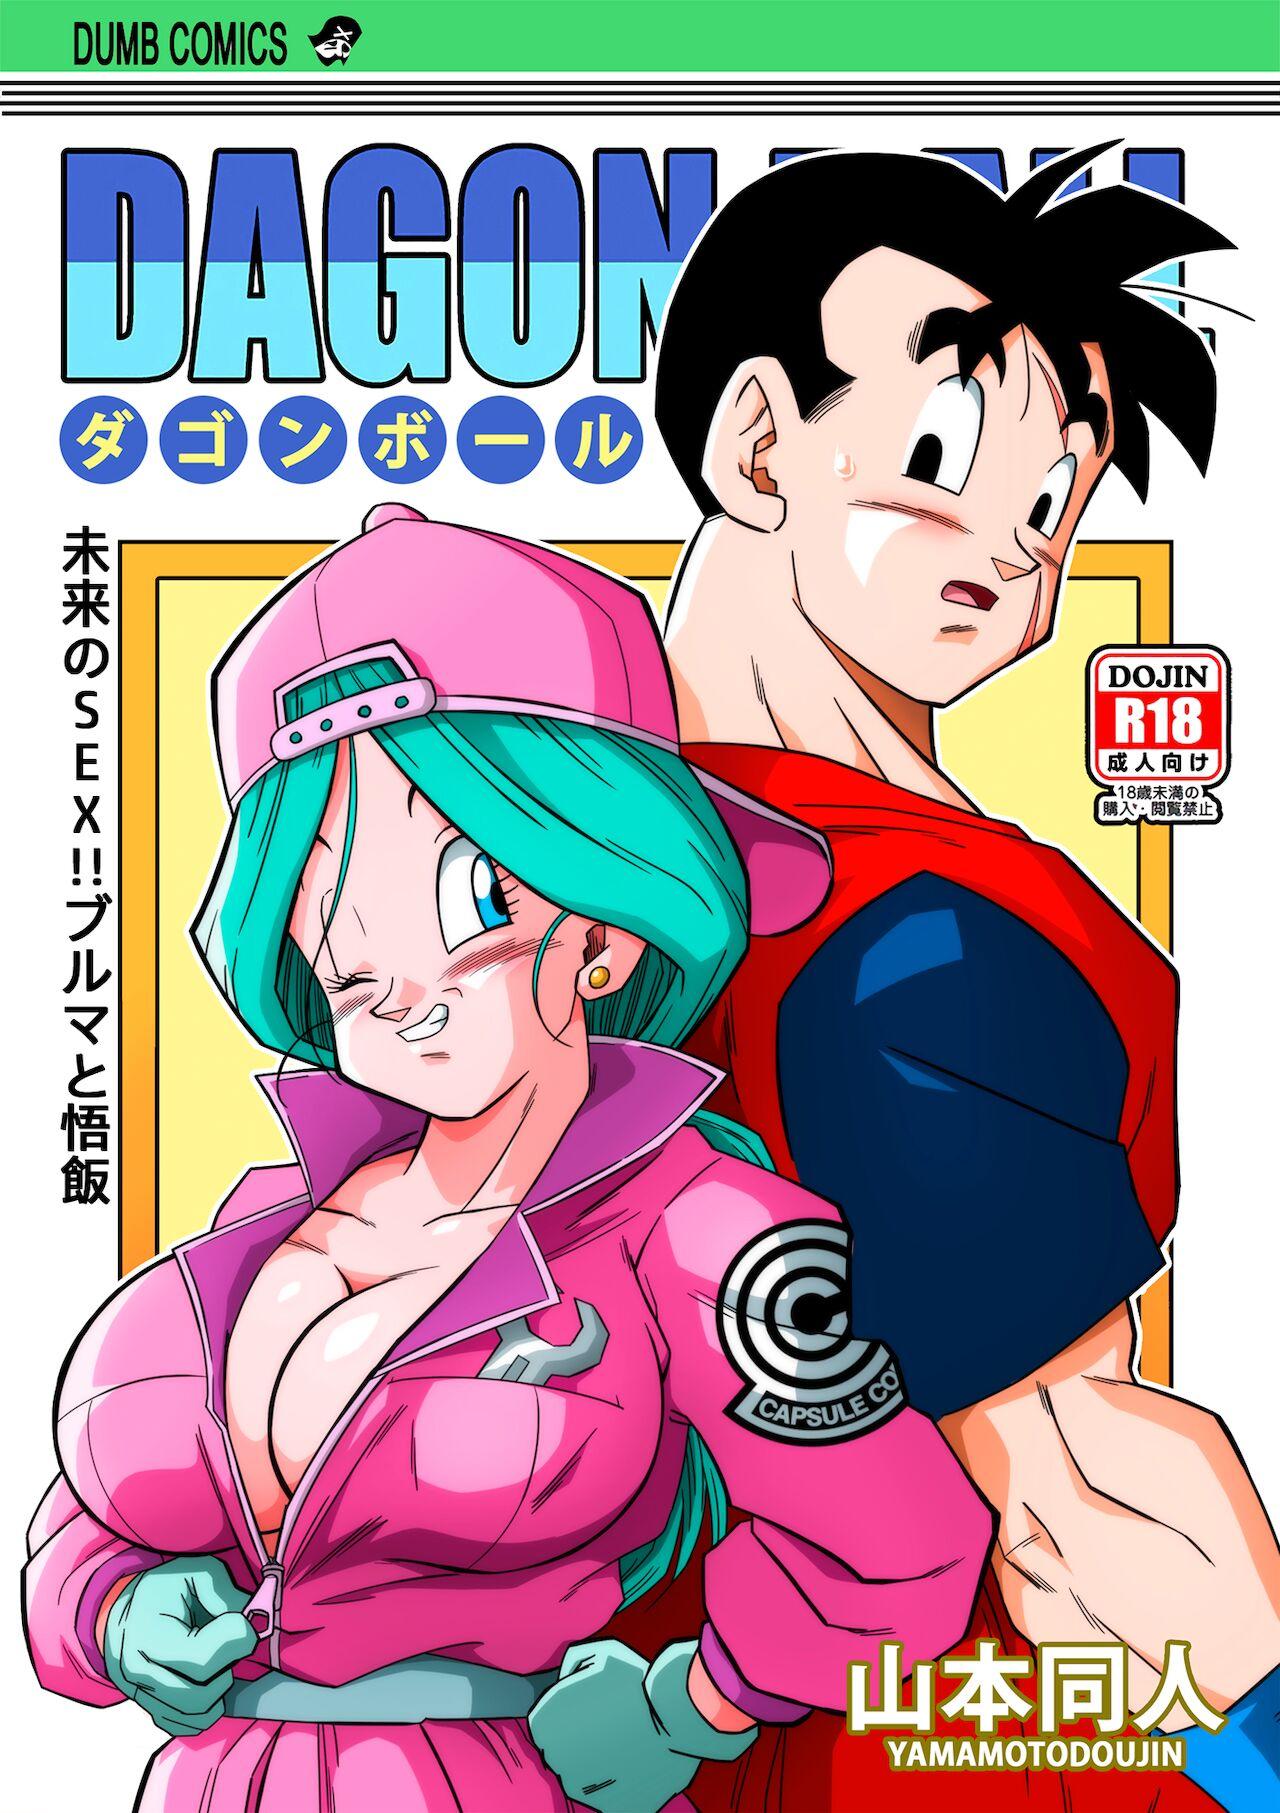 Amateur Cum Lost of sex in this Future! - BULMA and GOHAN - Dragon ball z Cornudo - Page 1